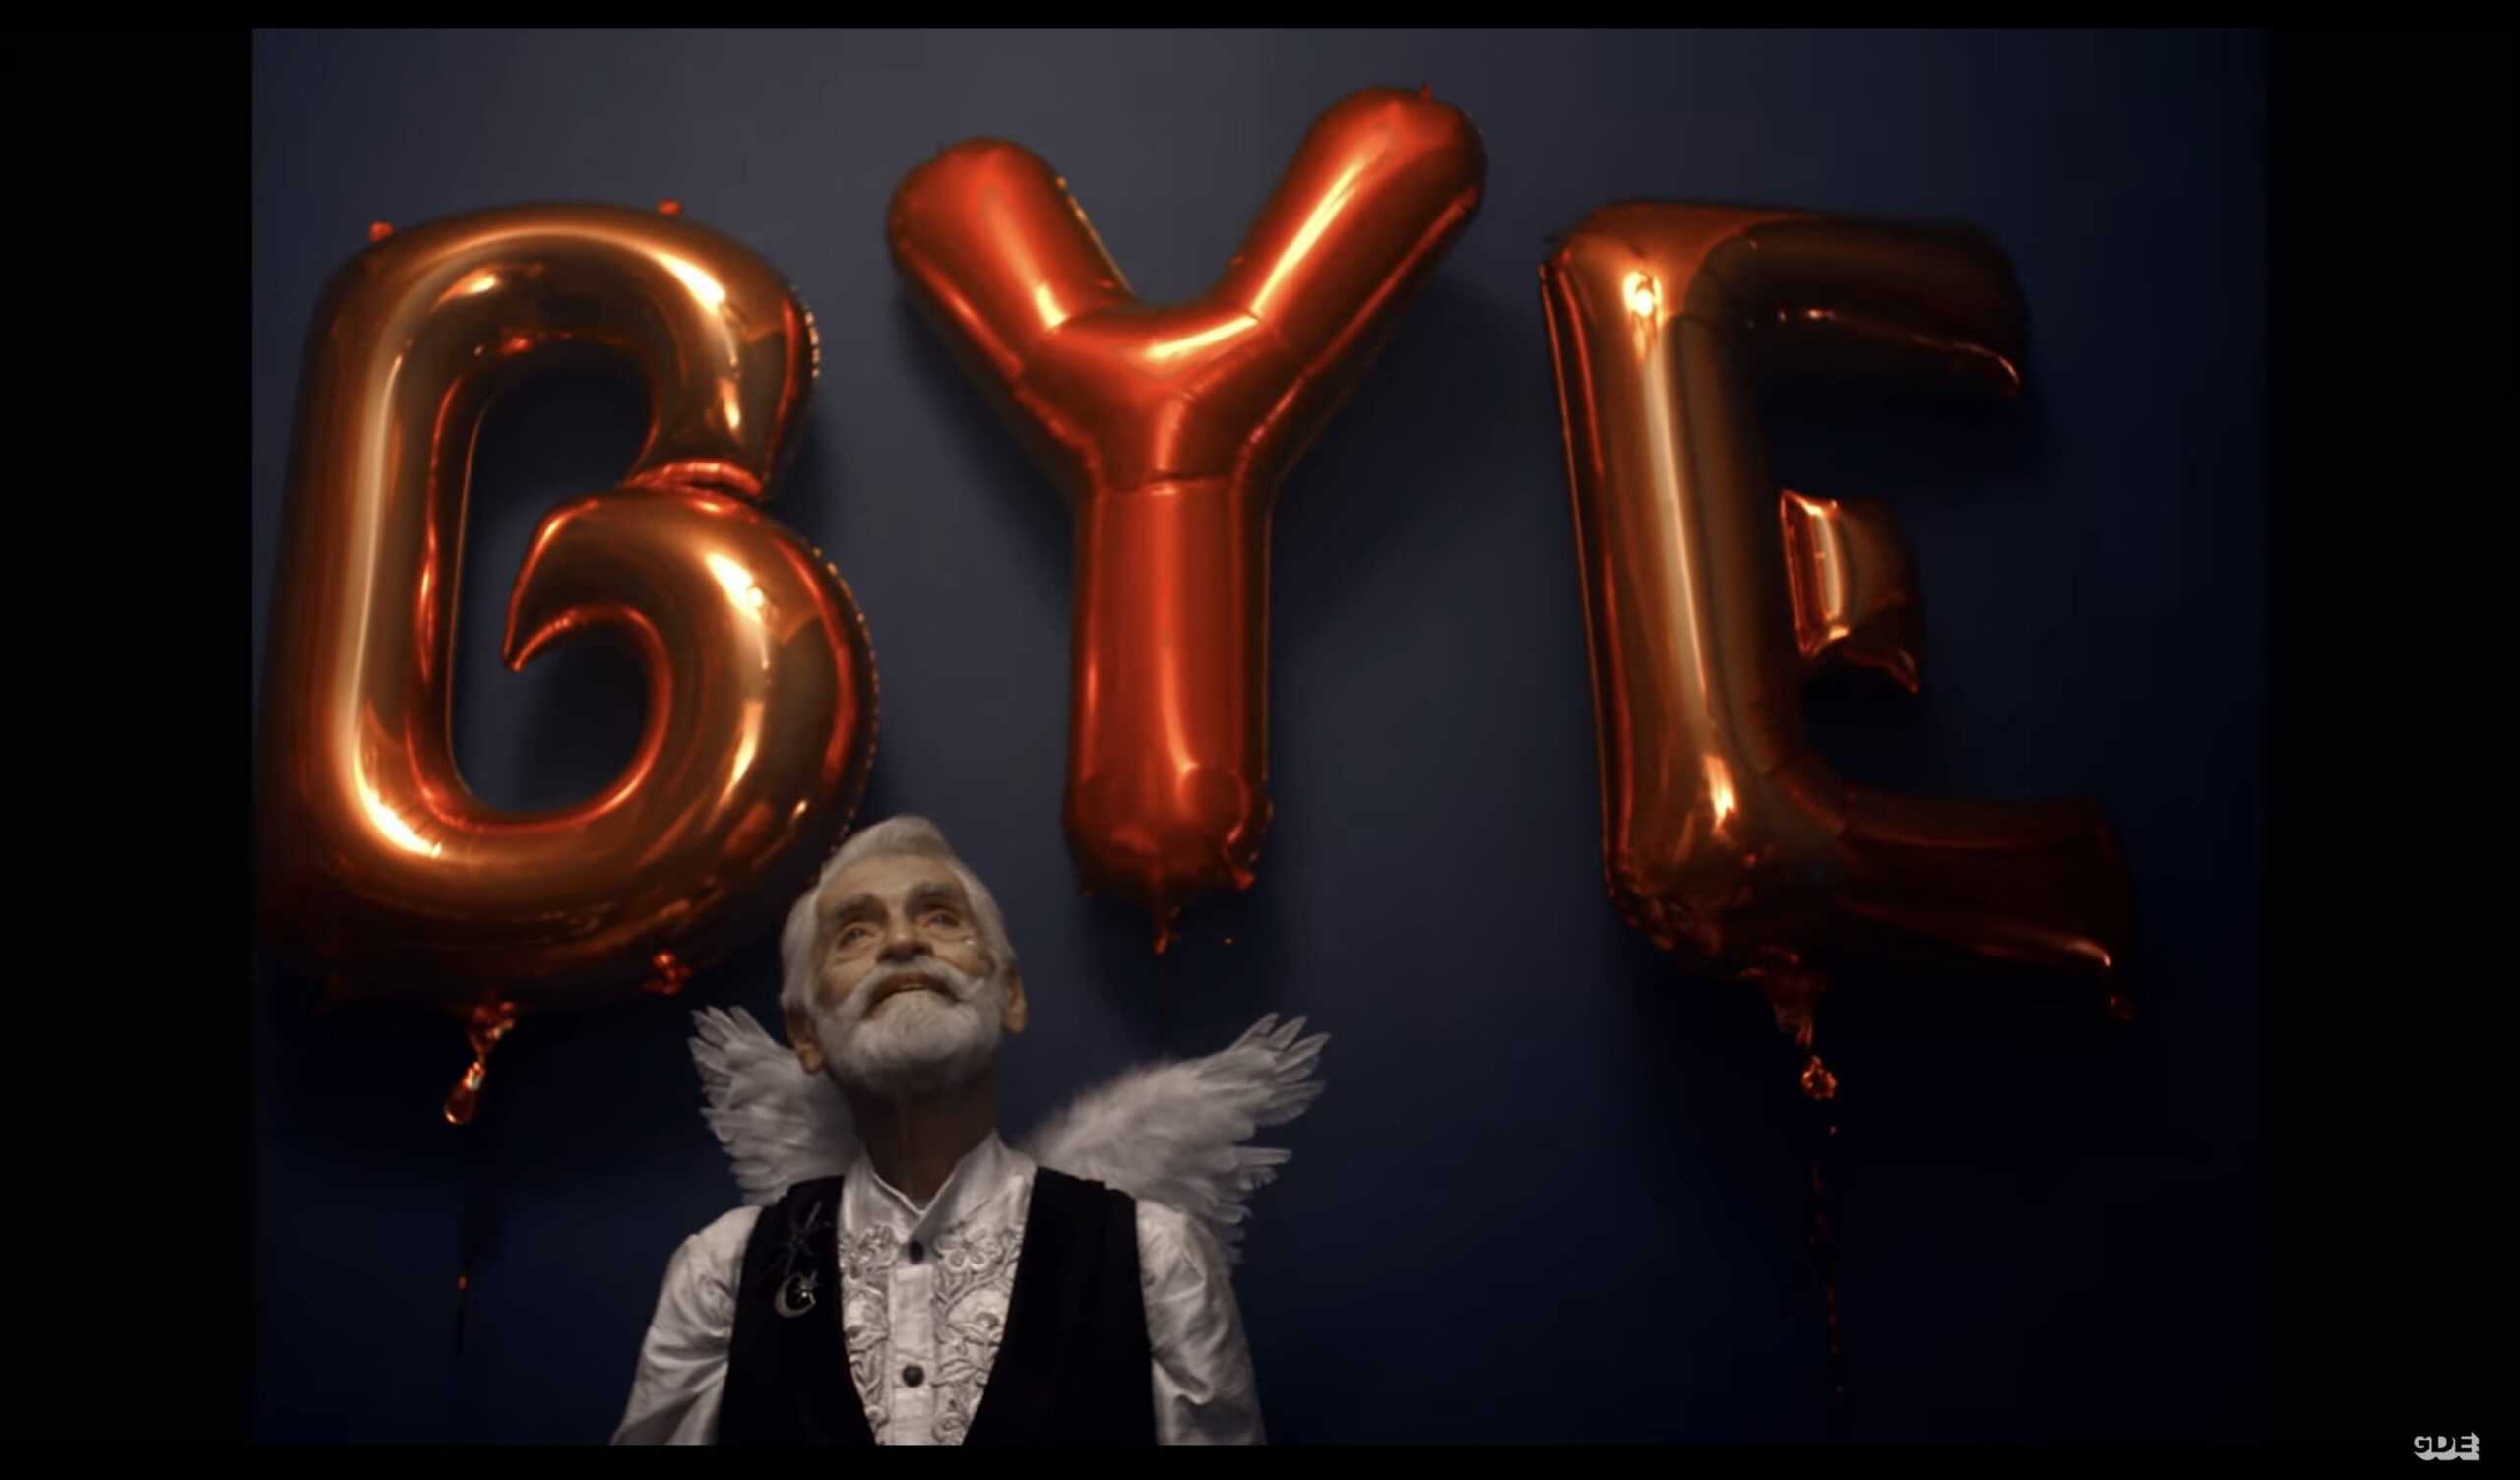 Moon Manor Jimmy (James "Jimmy" Carrozo) in front of balloons which spell out "Bye"